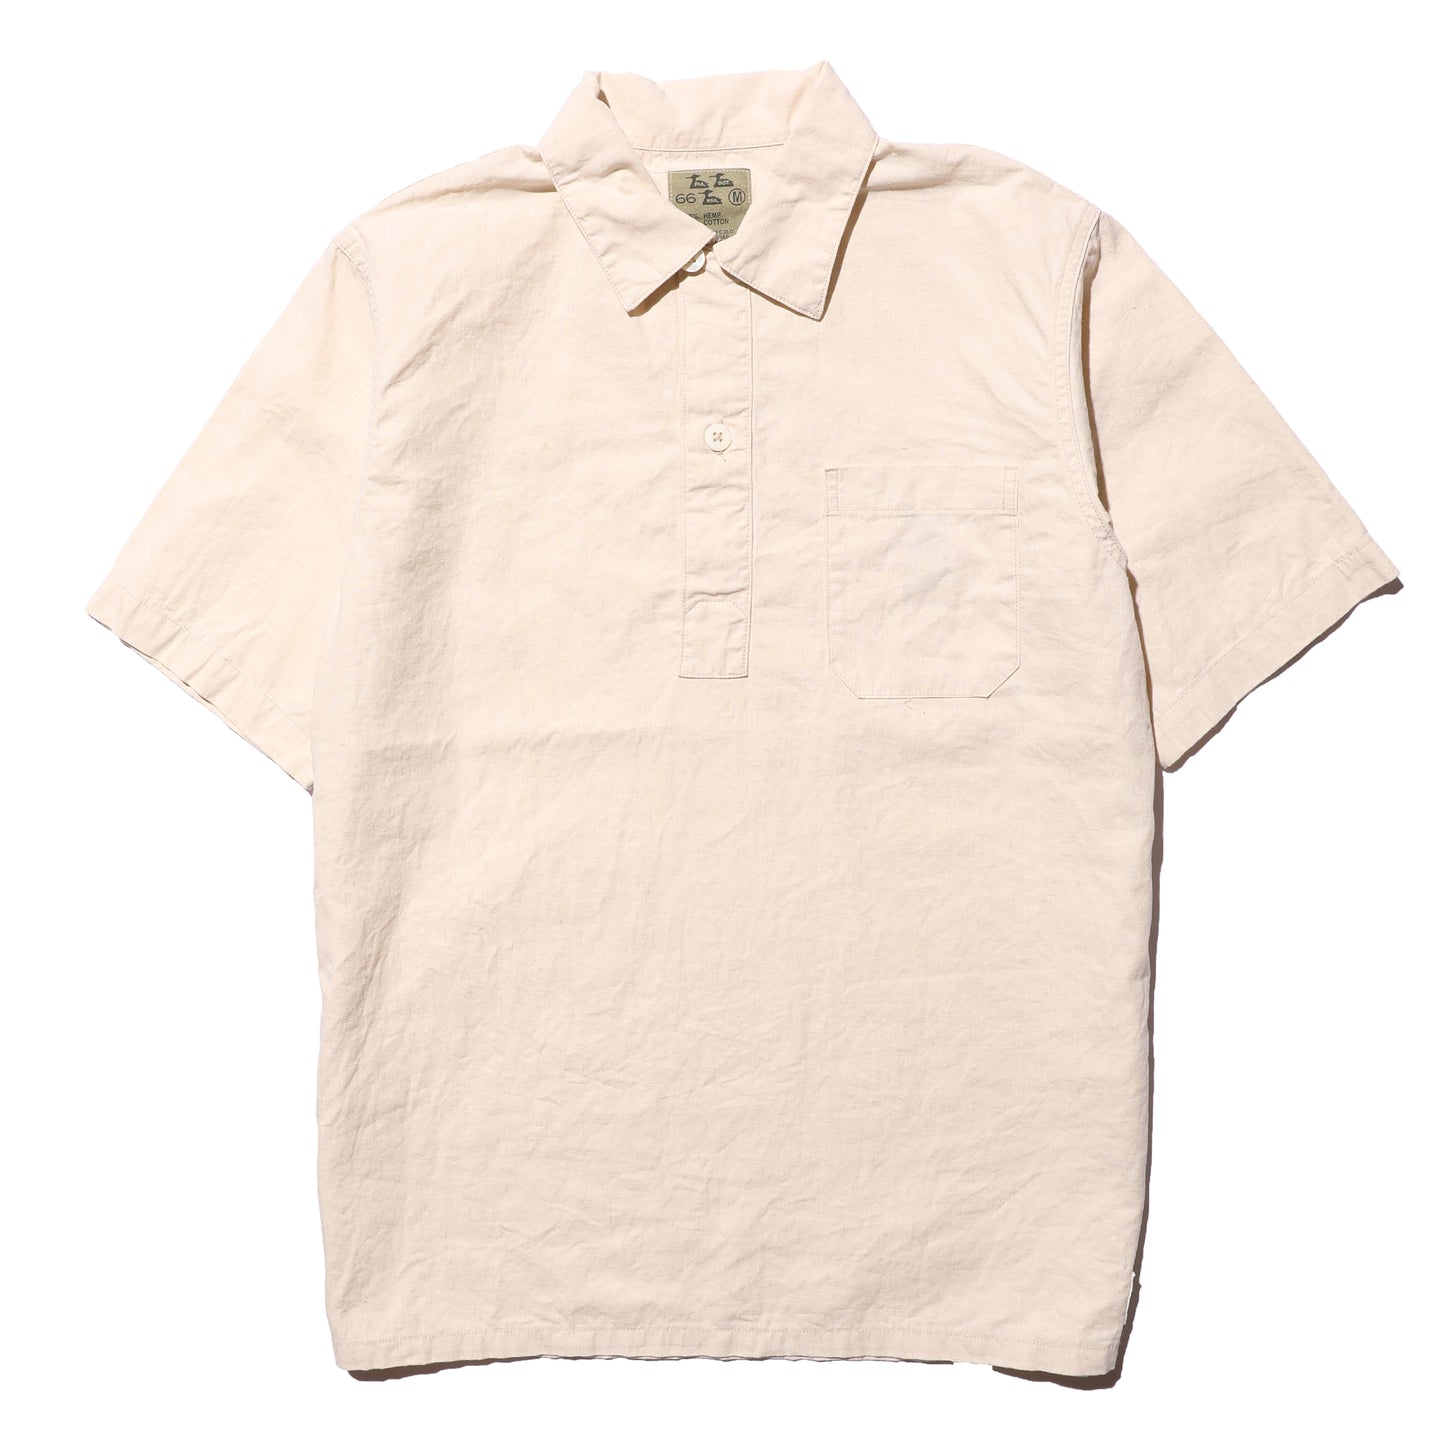 COLIMBO Compton M55 Type Pullover Shirt S/S【ZY-0302】